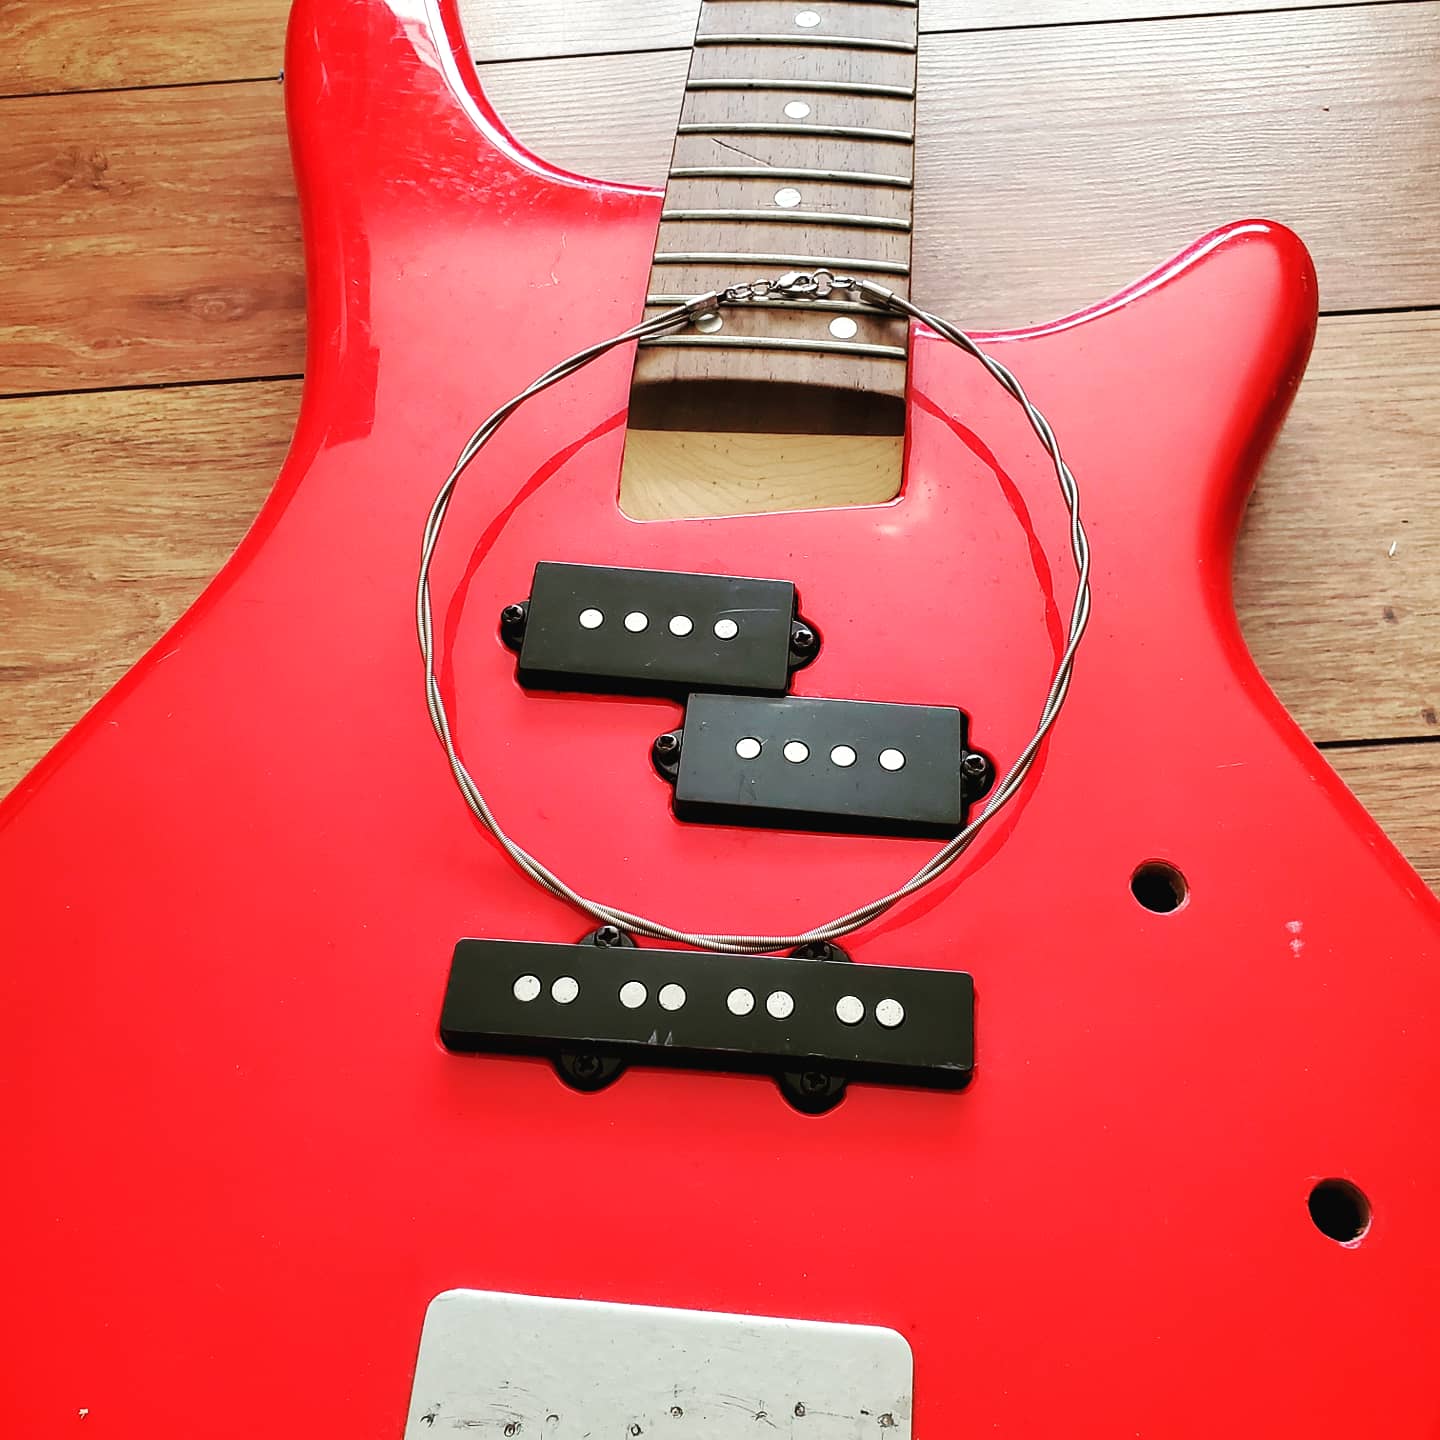 a silver coloured bass guitar string necklace (two string twisted) lying on top of a red bass guitar that has the strings removed with a wood background